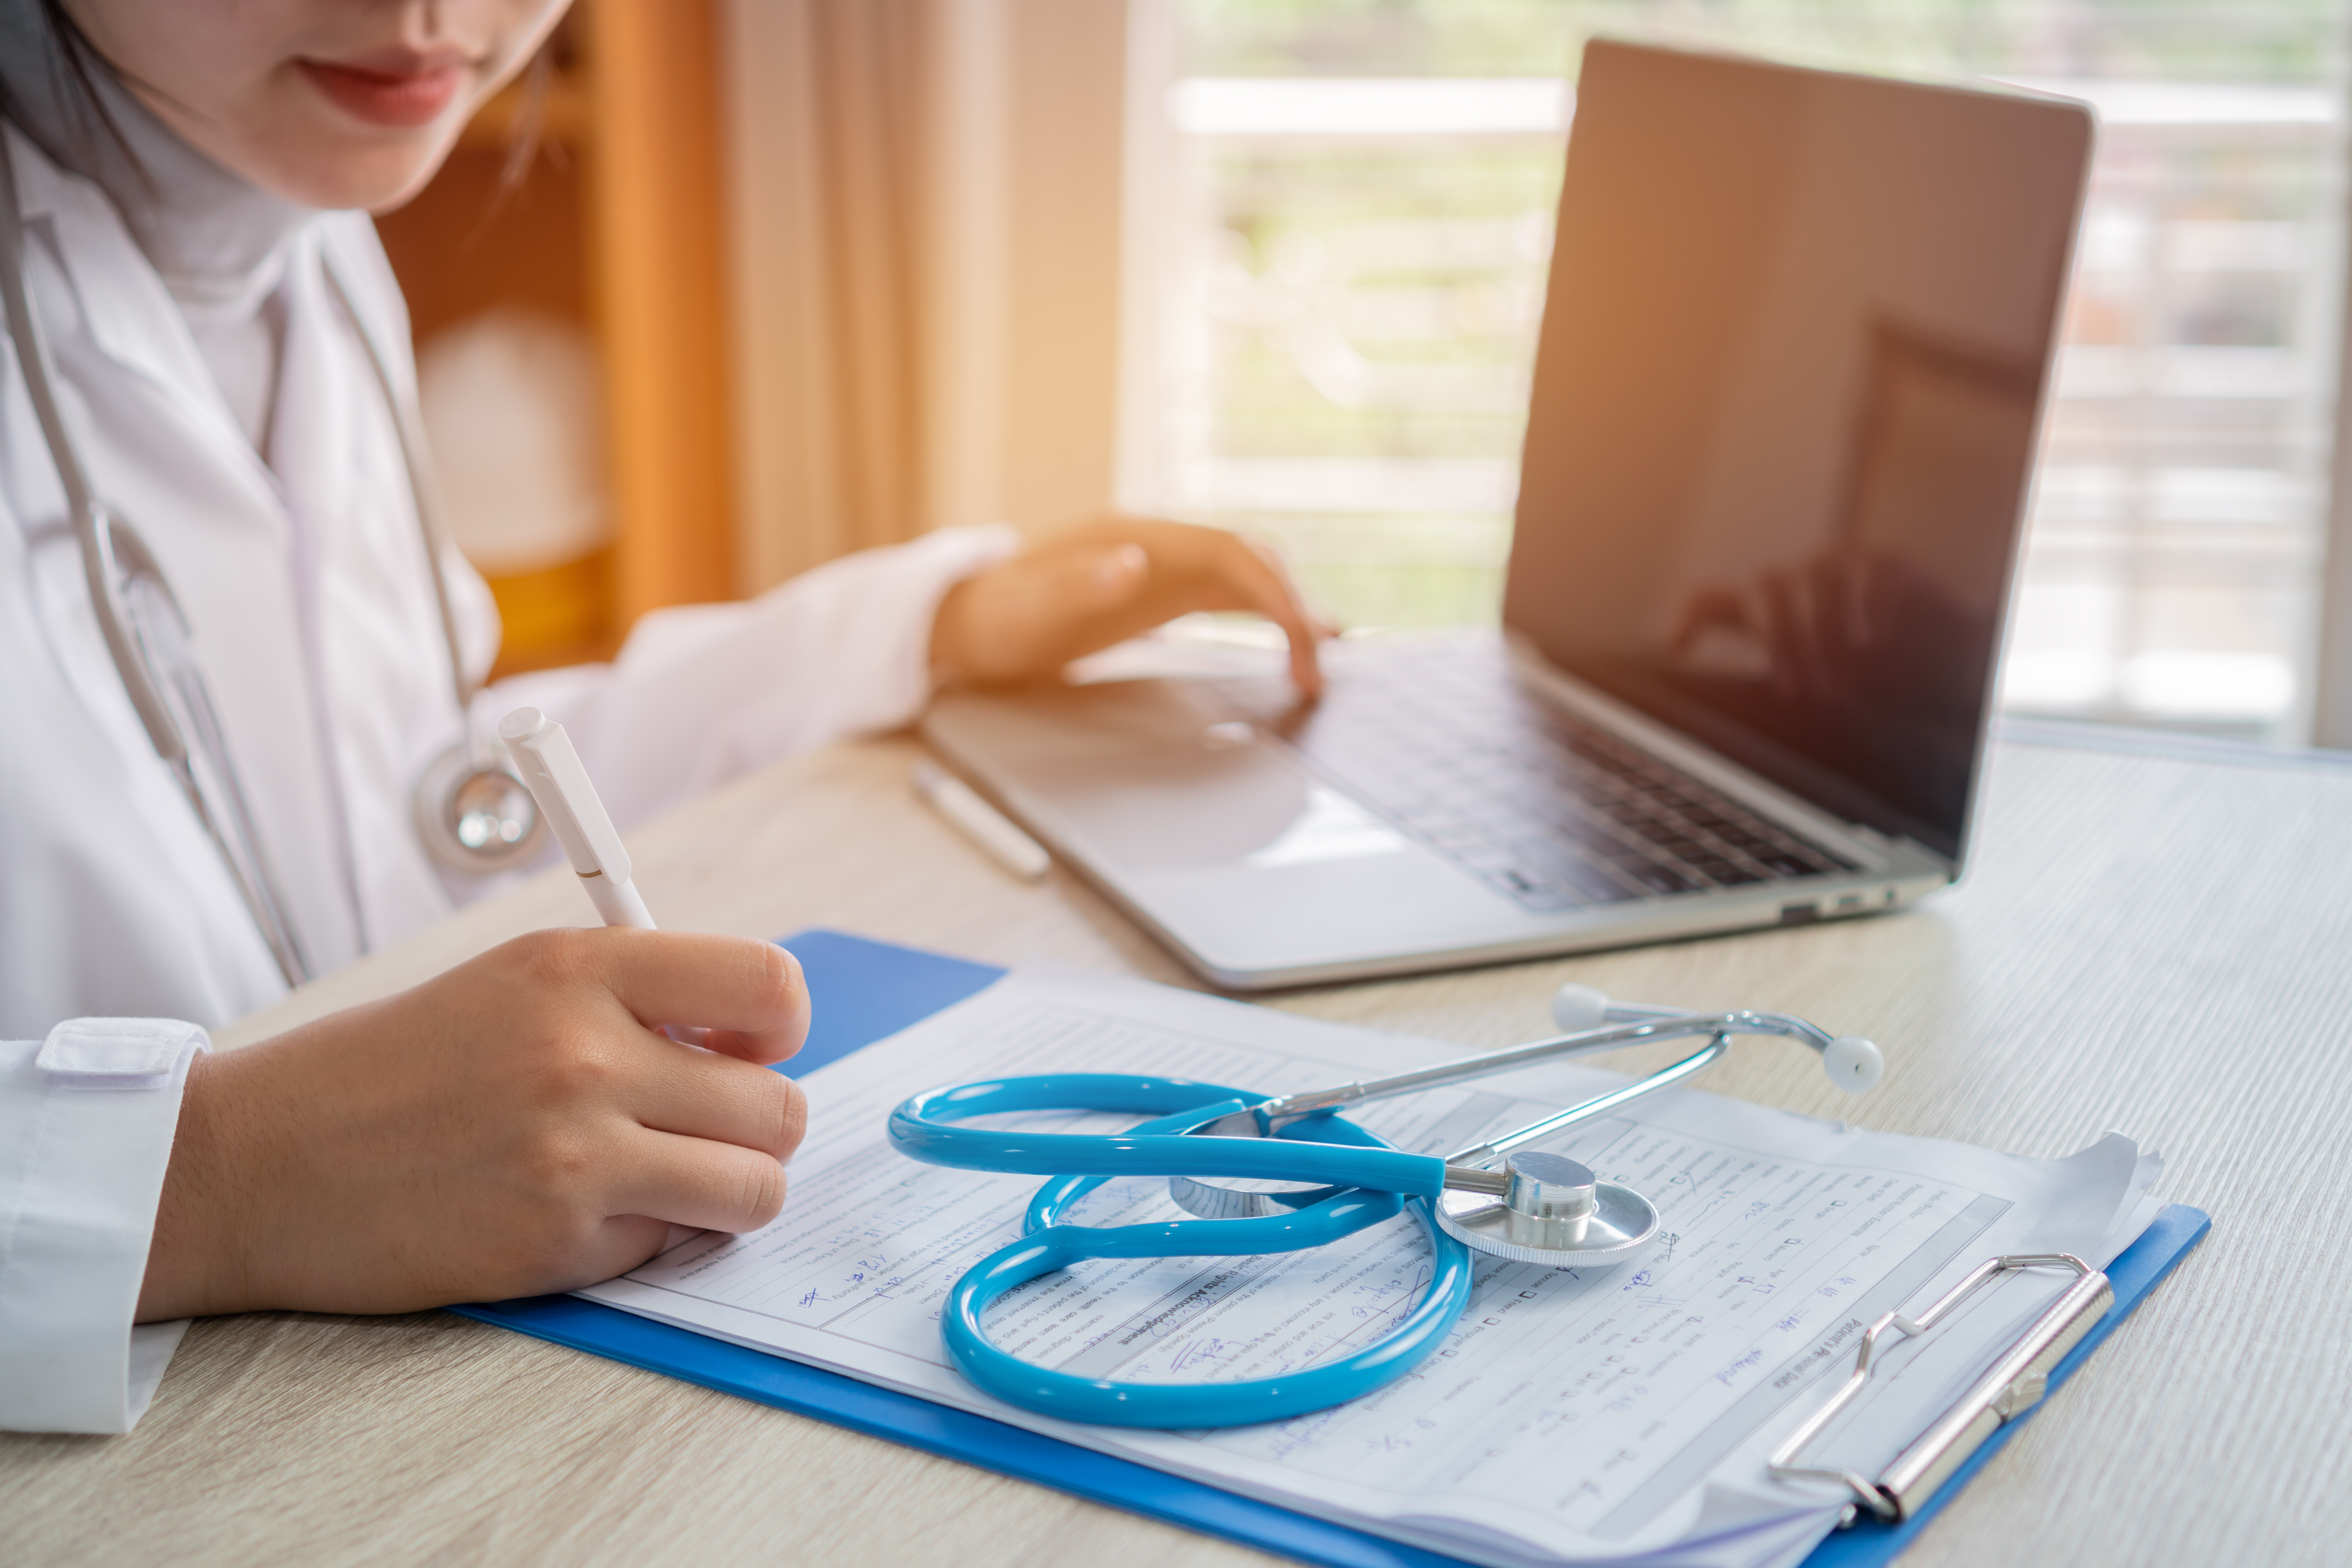 5 Healthcare Reporting Tools to Make Informed Business Decisions